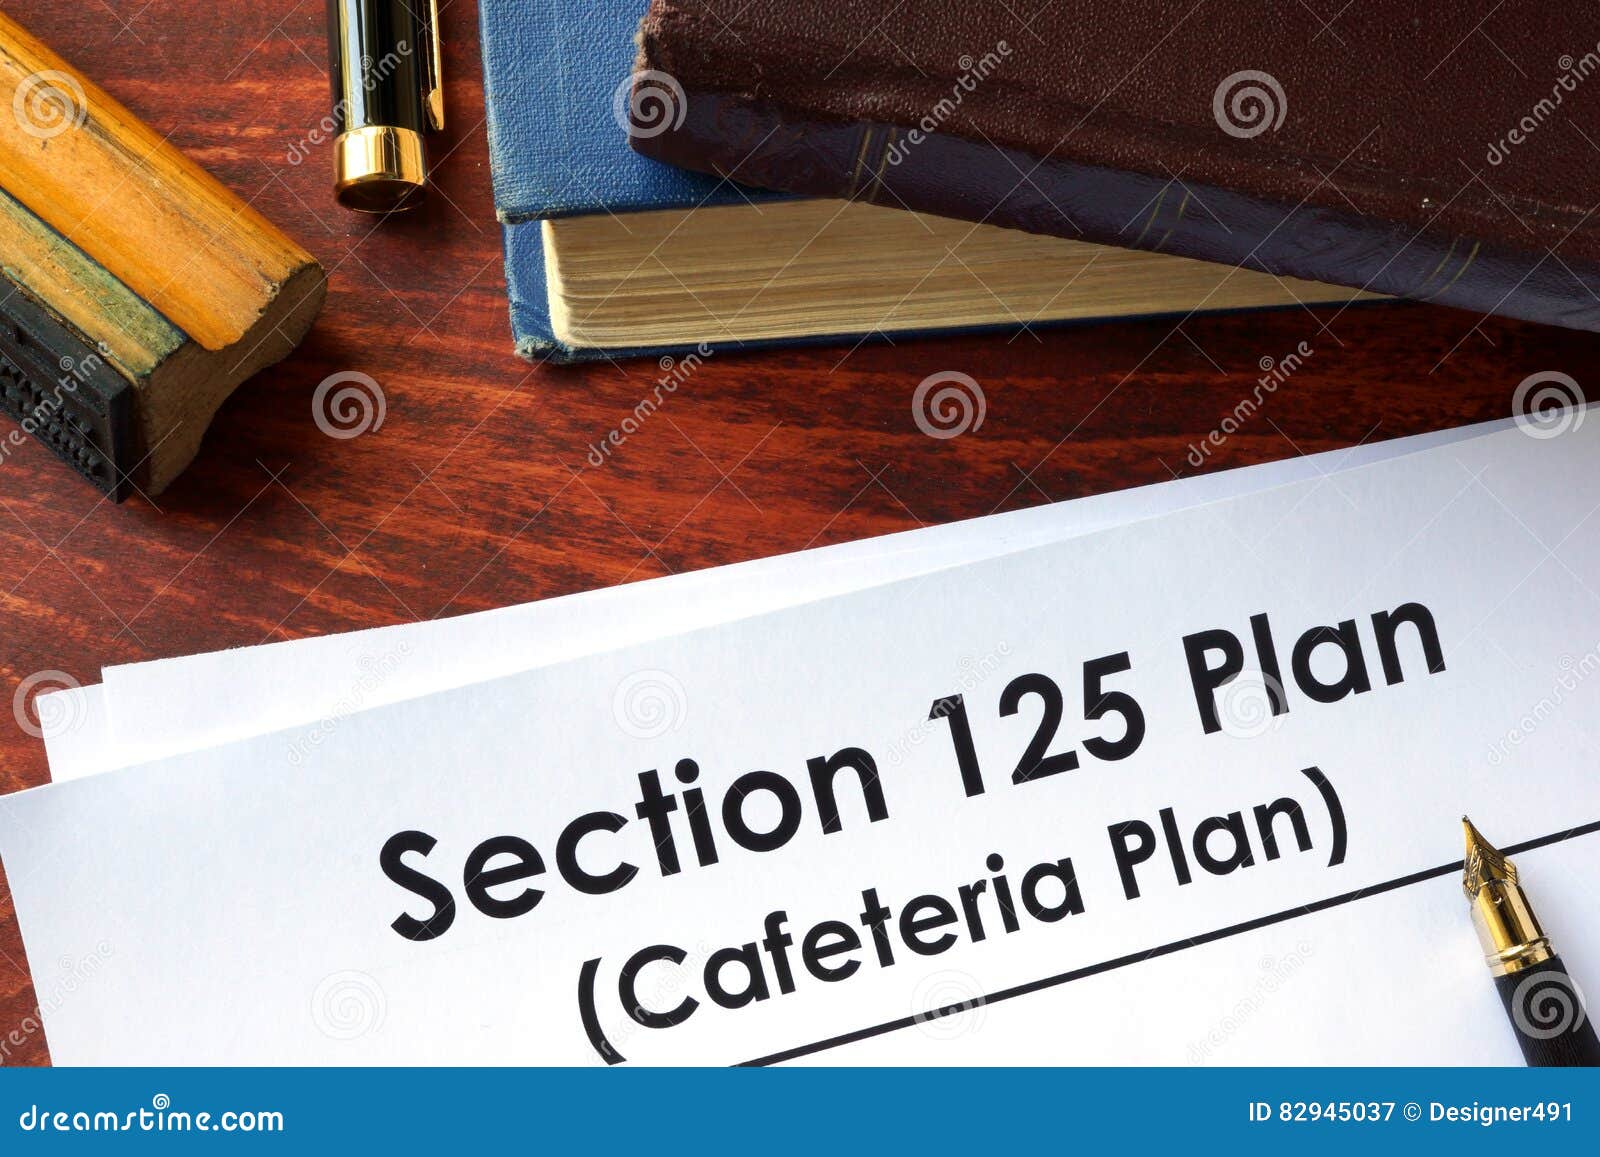 papers with section 125 plan cafeteria plan